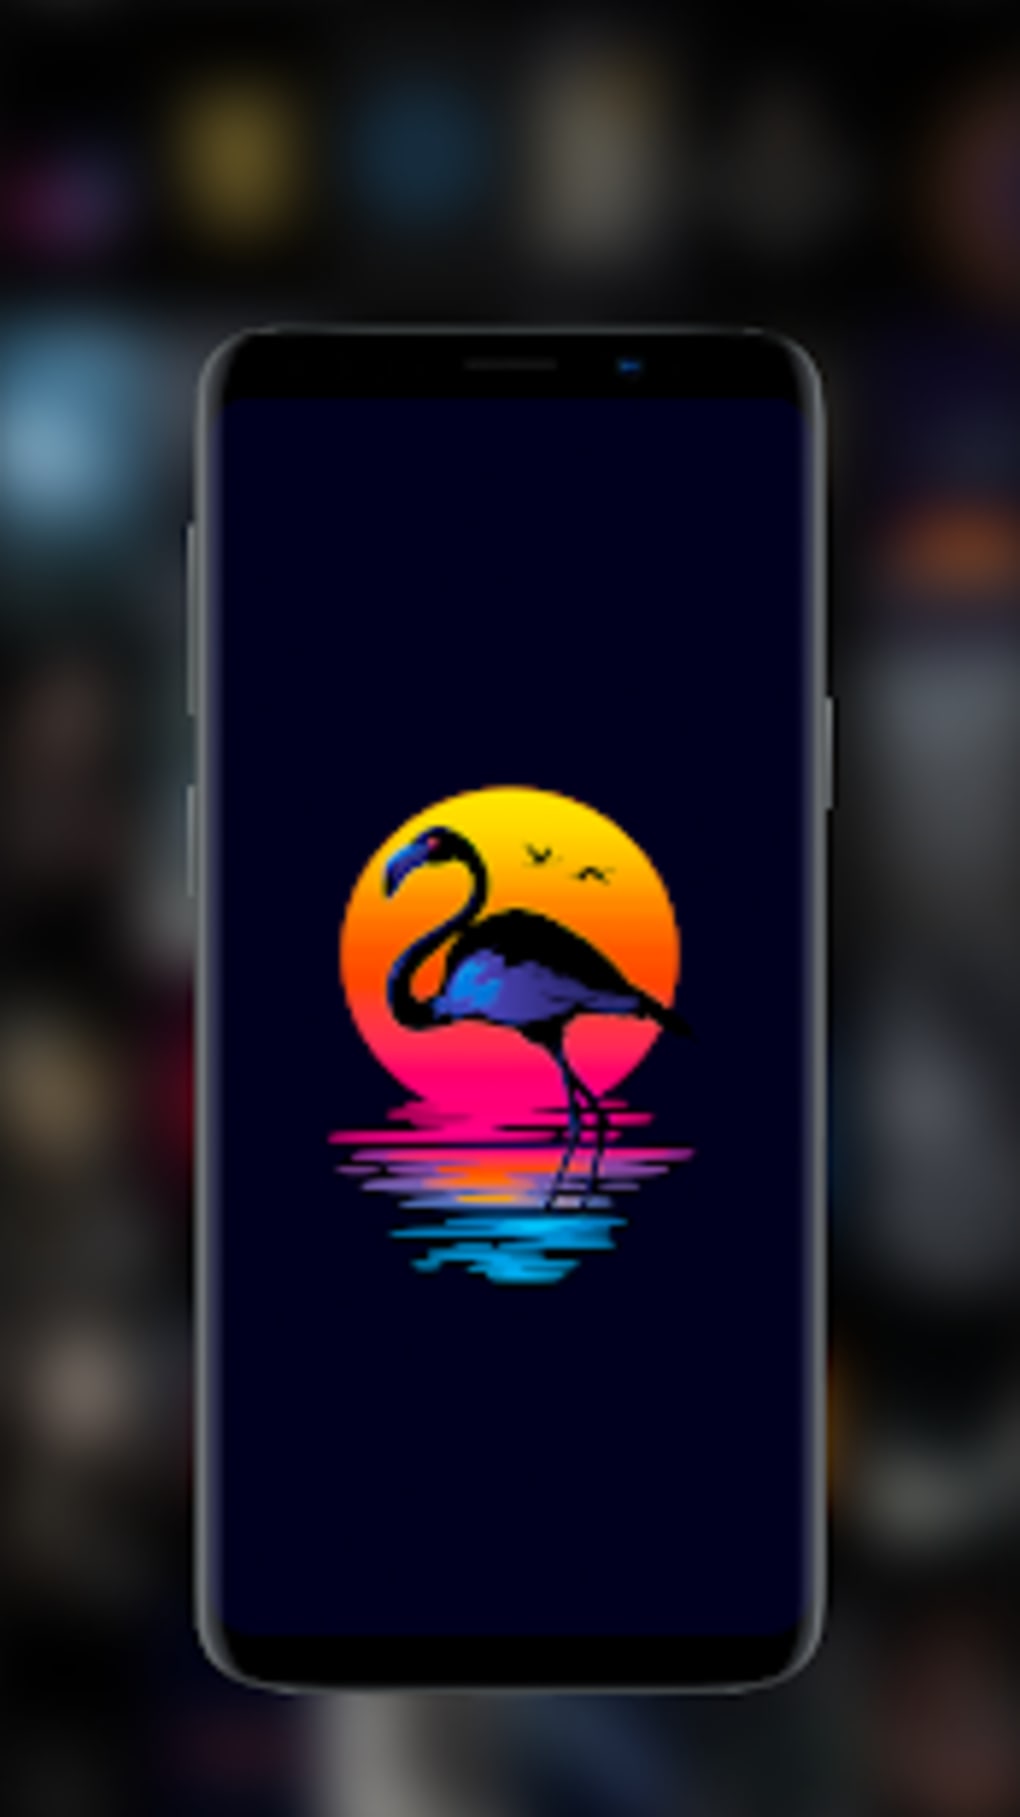 Amoled black minimalism with jordan logo in the middle | Wallpapers.ai